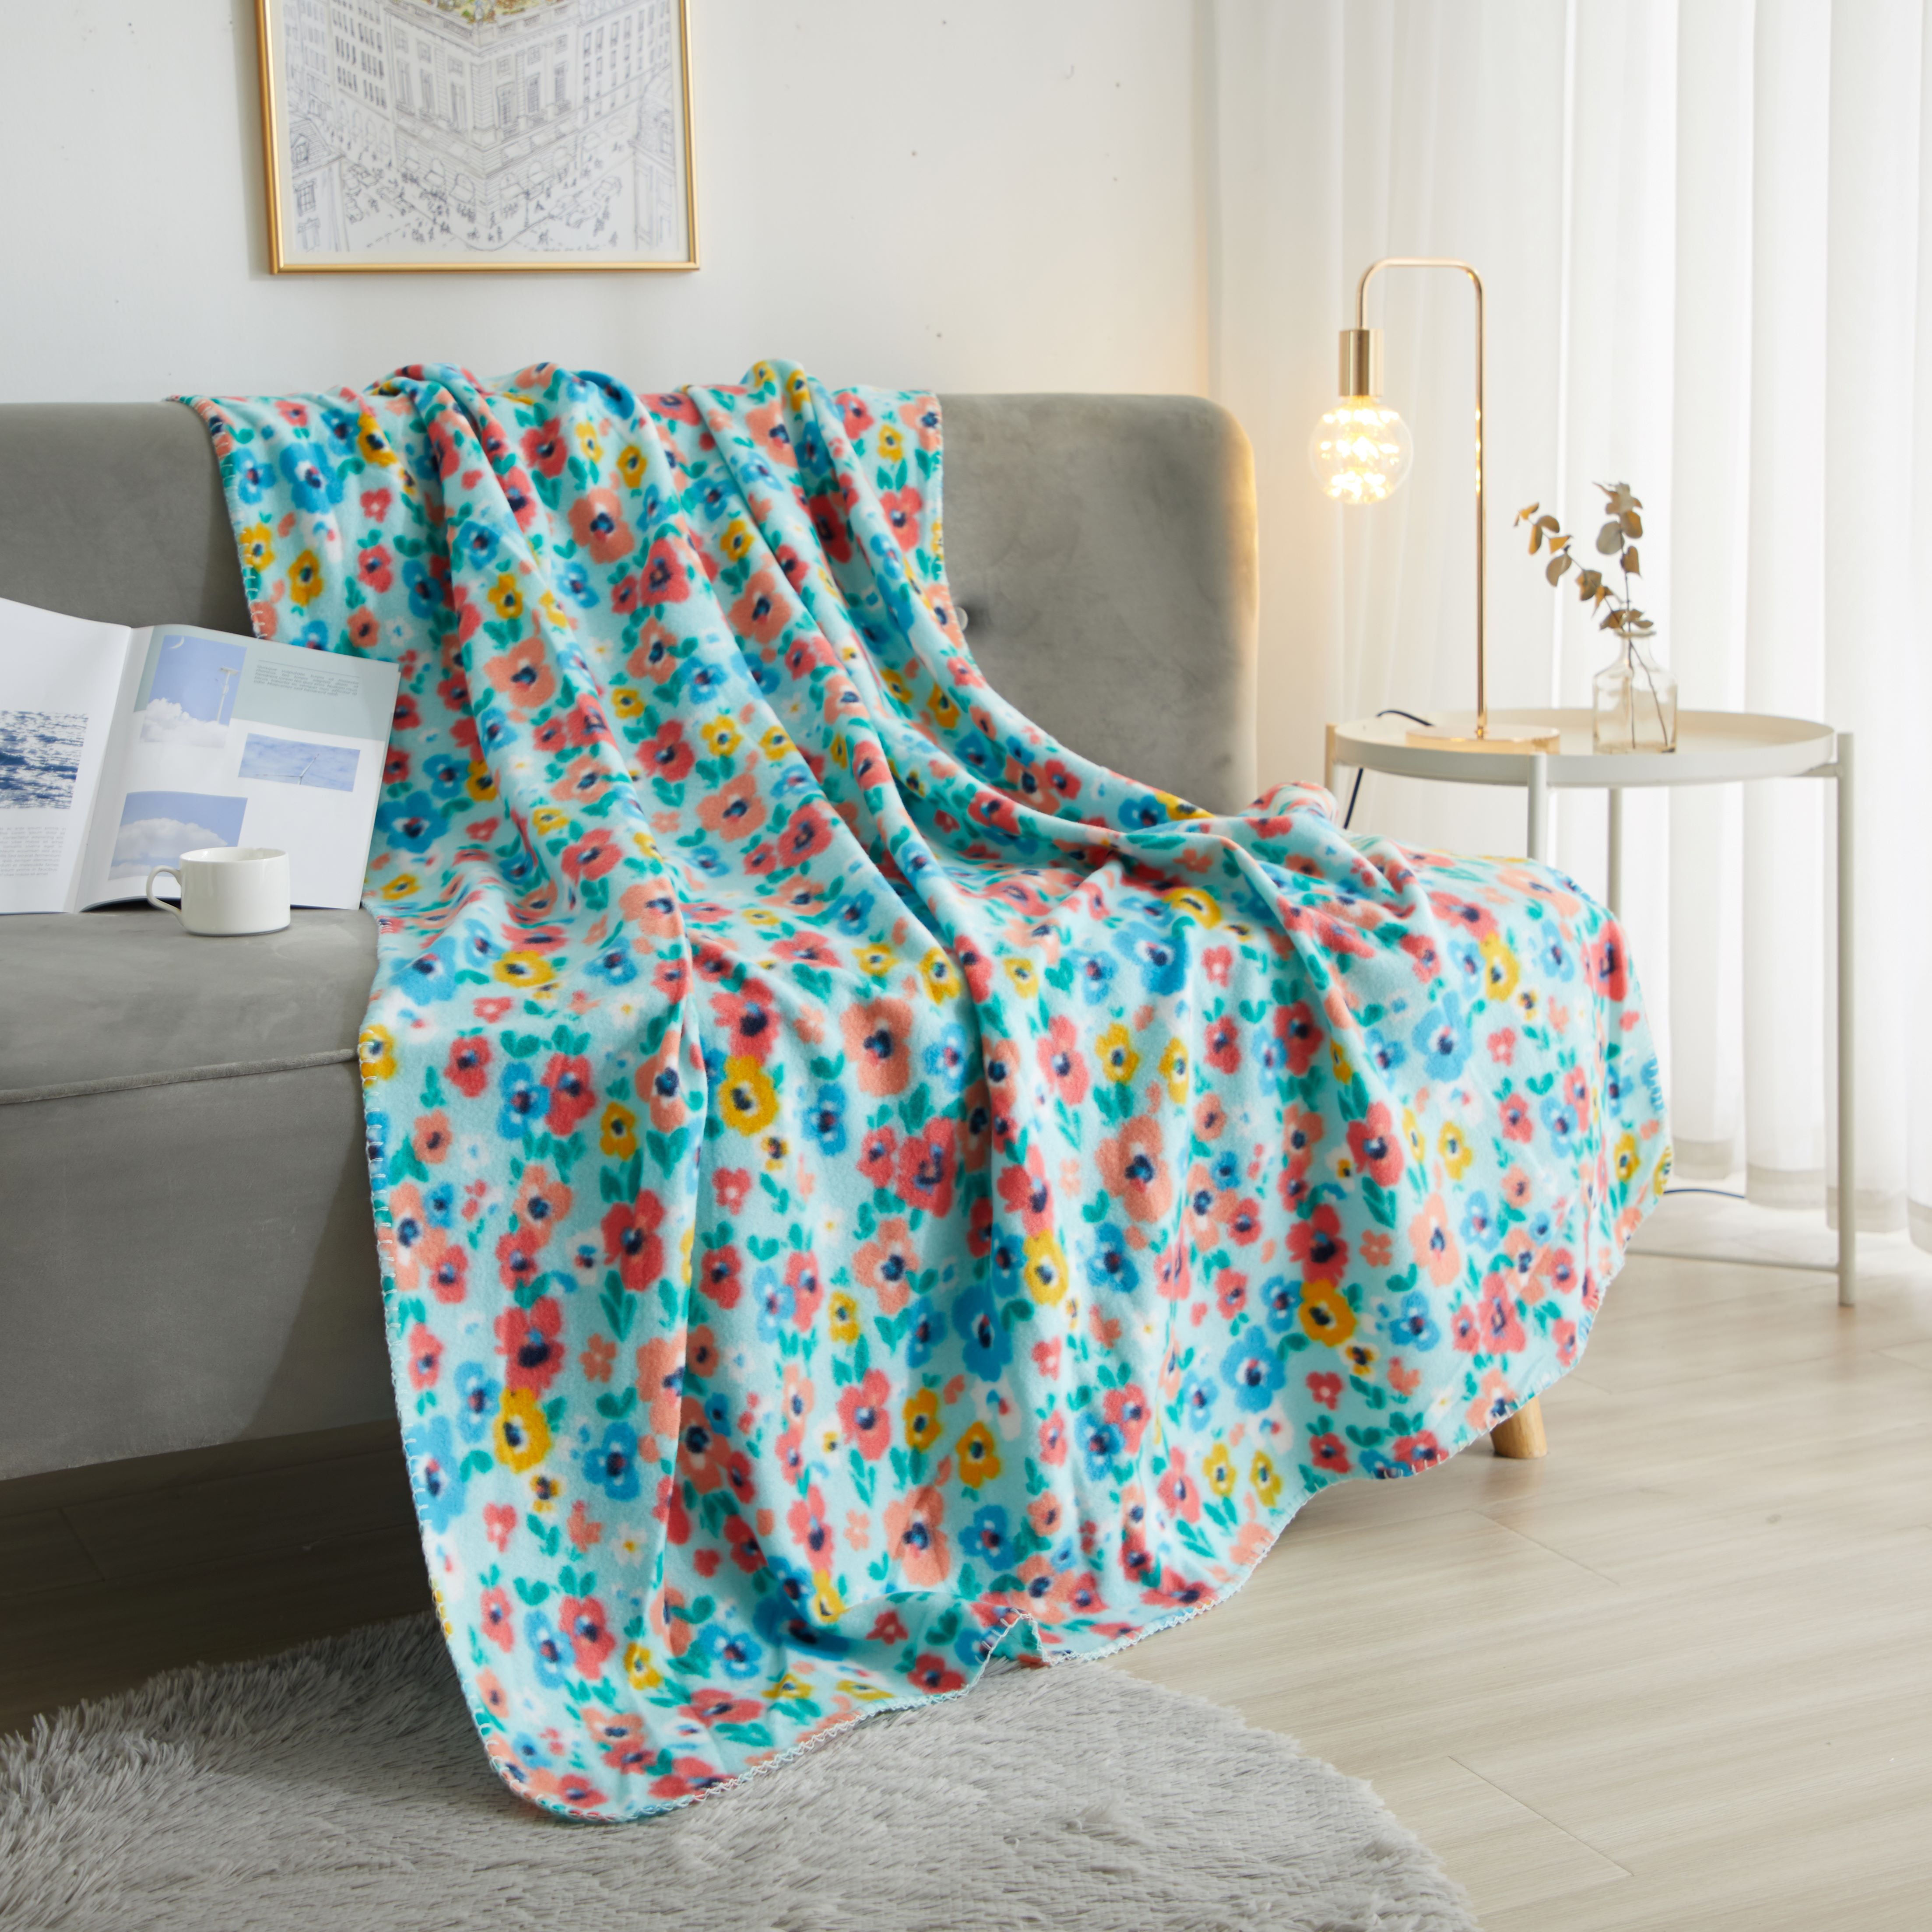 Mainstays Fleece Plush Throw Blanket, 50" x 60" inches, Blue Floral Polyester, Machine Washable